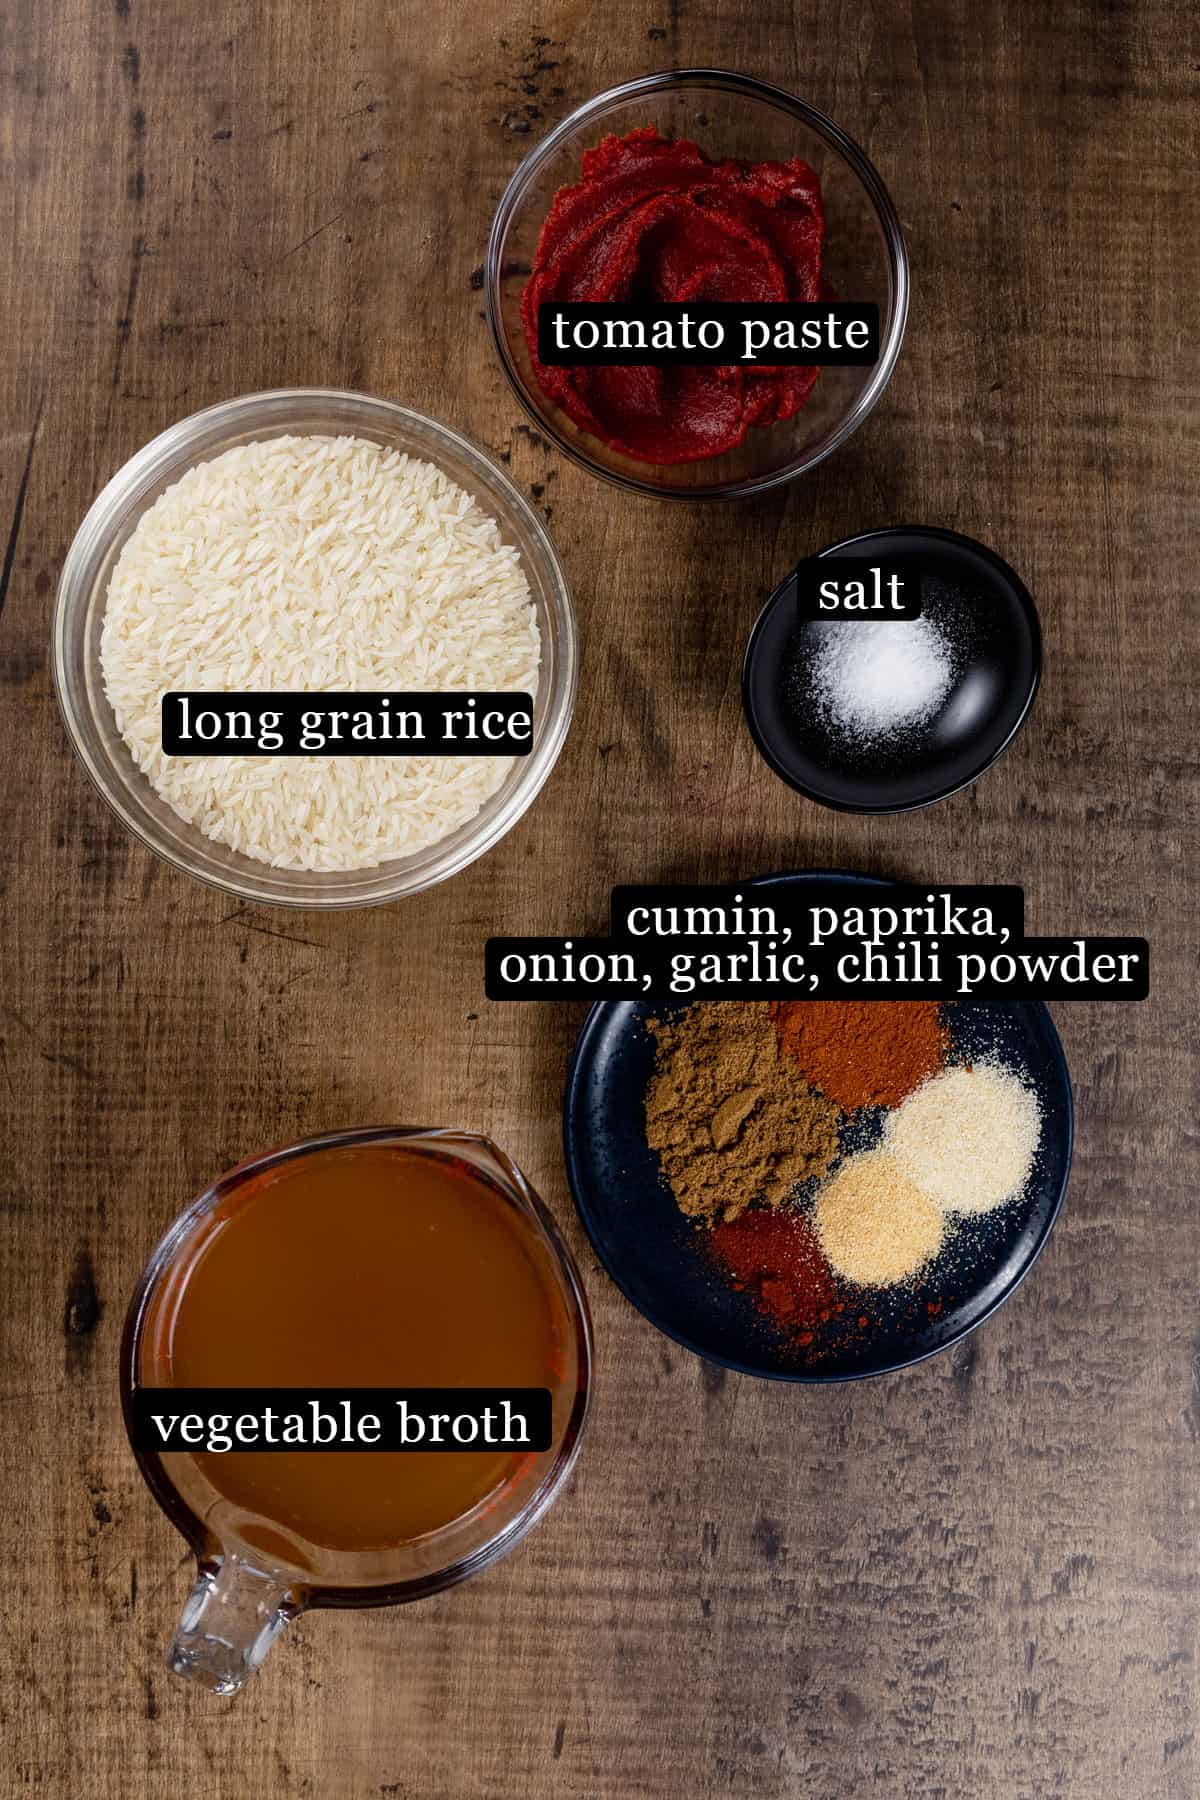 Ingredients for Spanish rice in various glass bowls on a wood tabletop. Black and white labels have been added to name each ingredient, like "tomato paste" and "long grain rice".